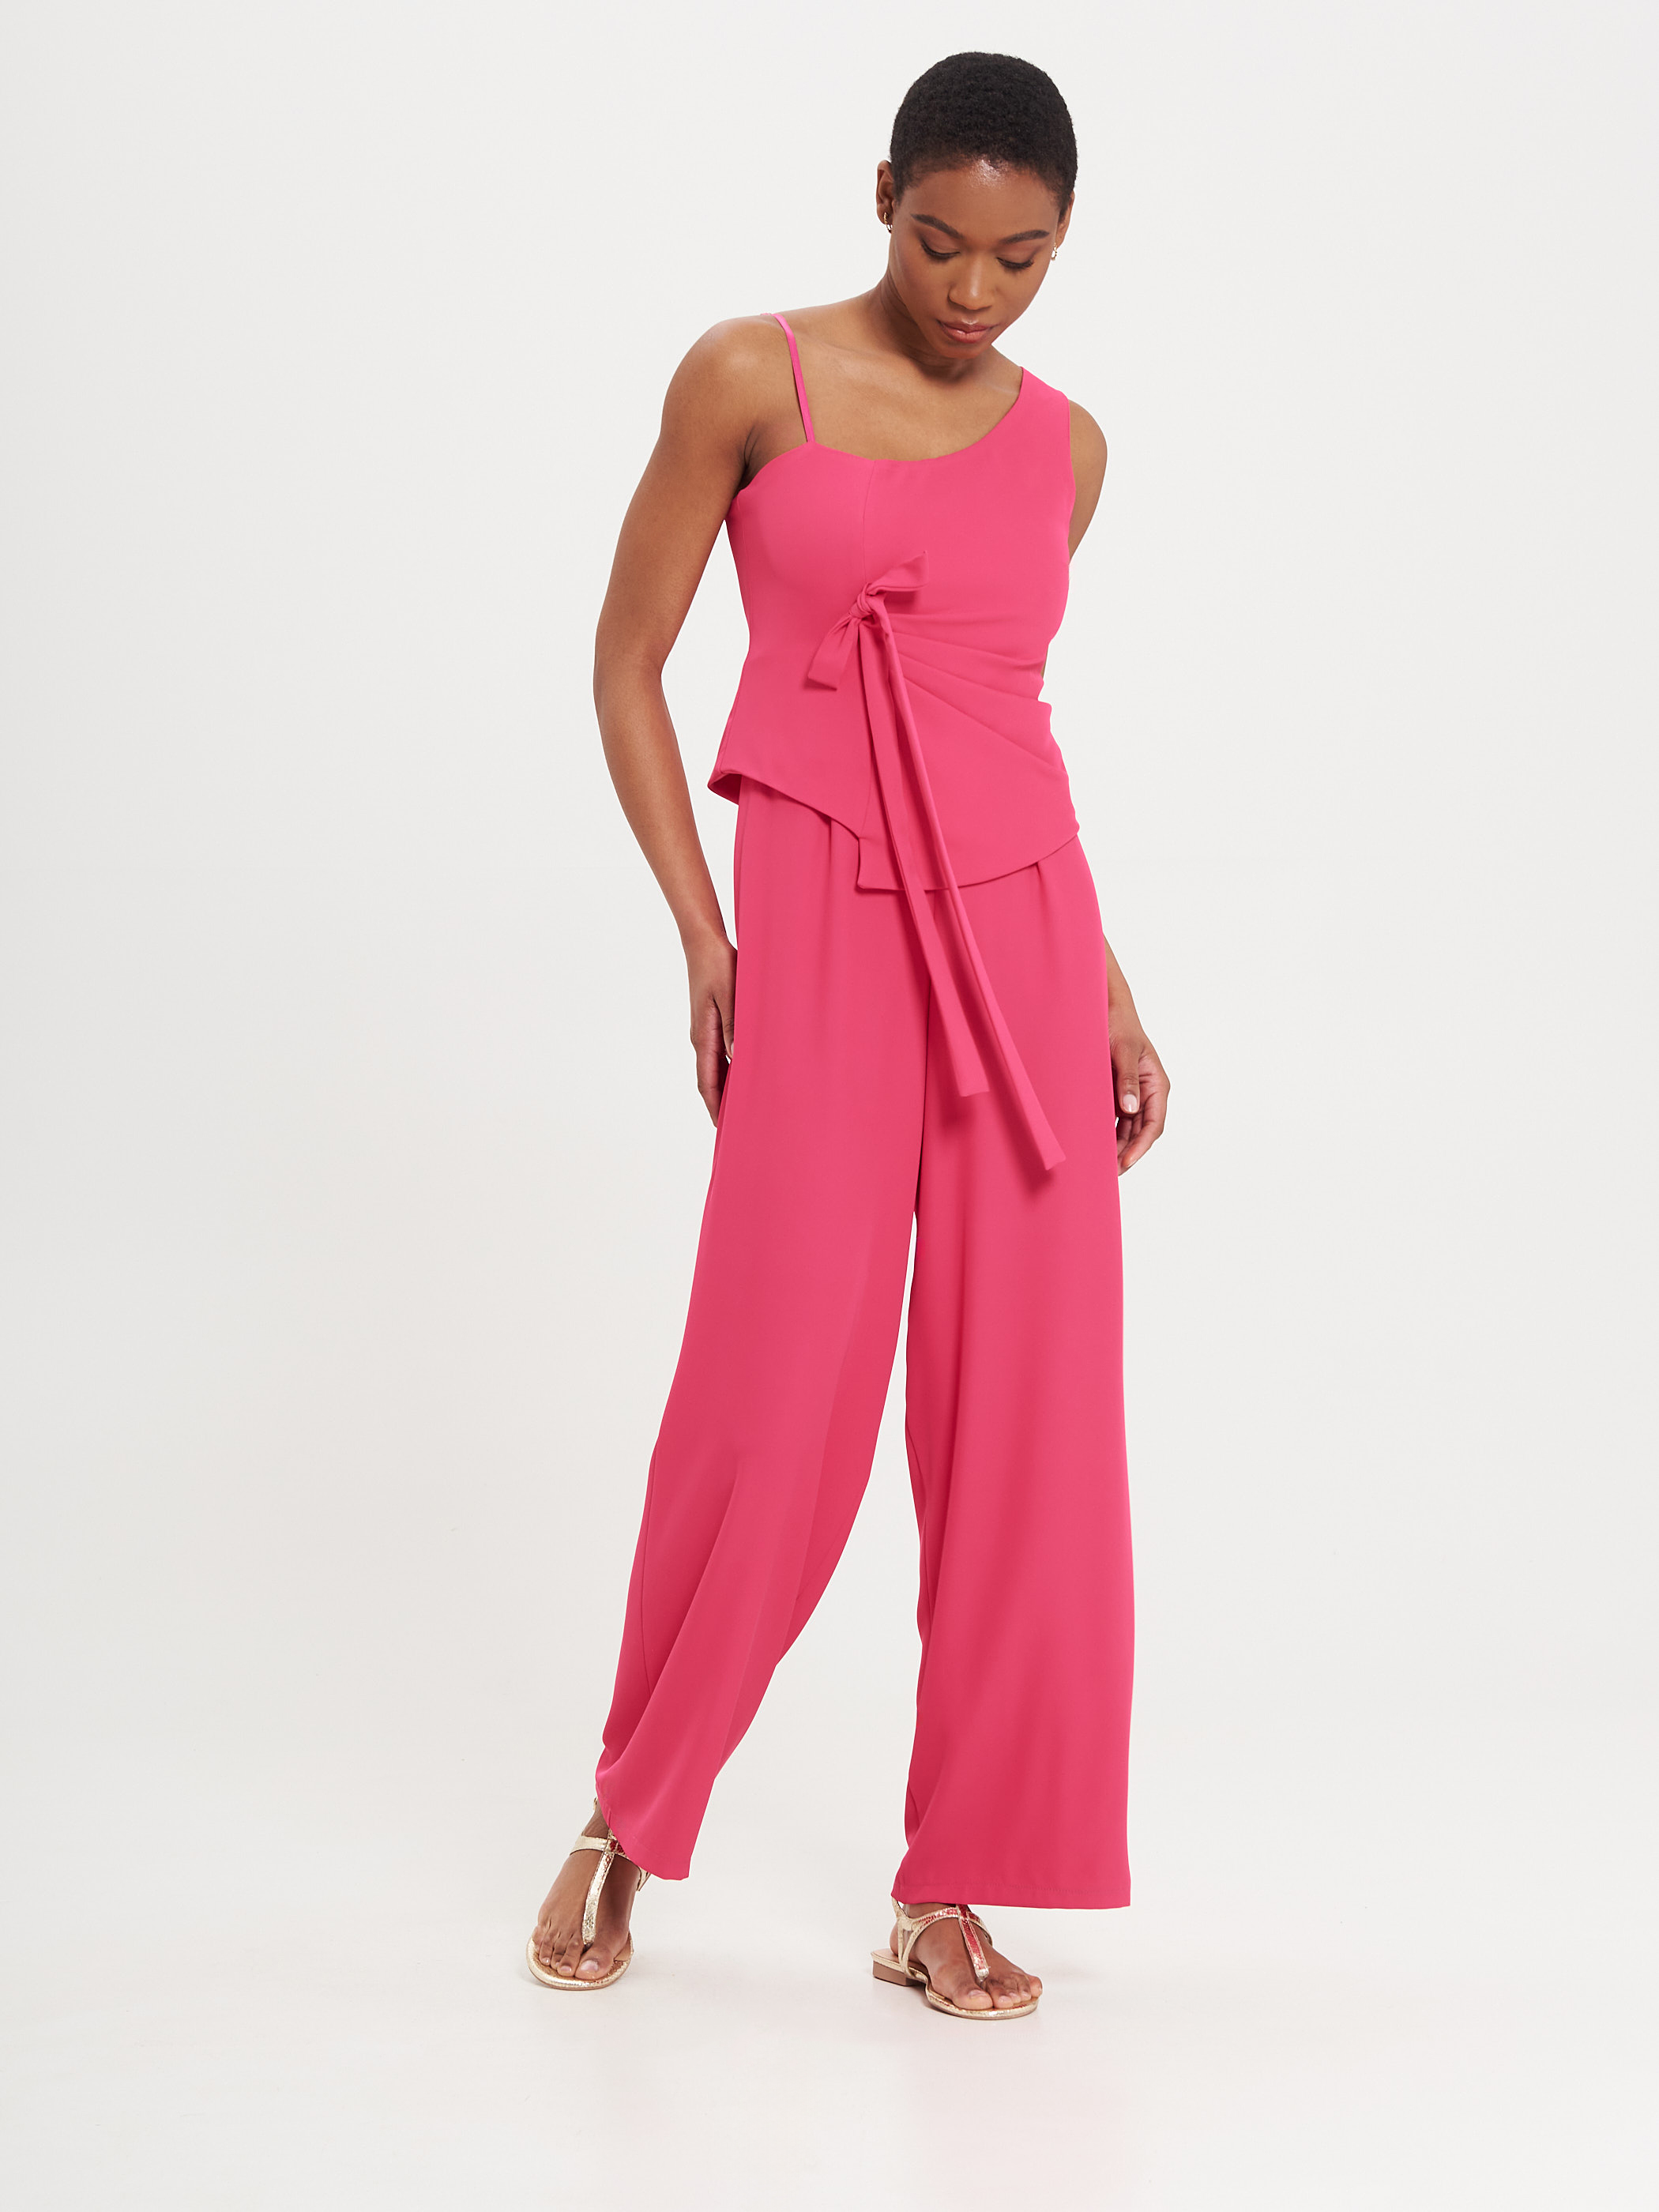 Fuchsia Flowy Jumpsuit with Bow